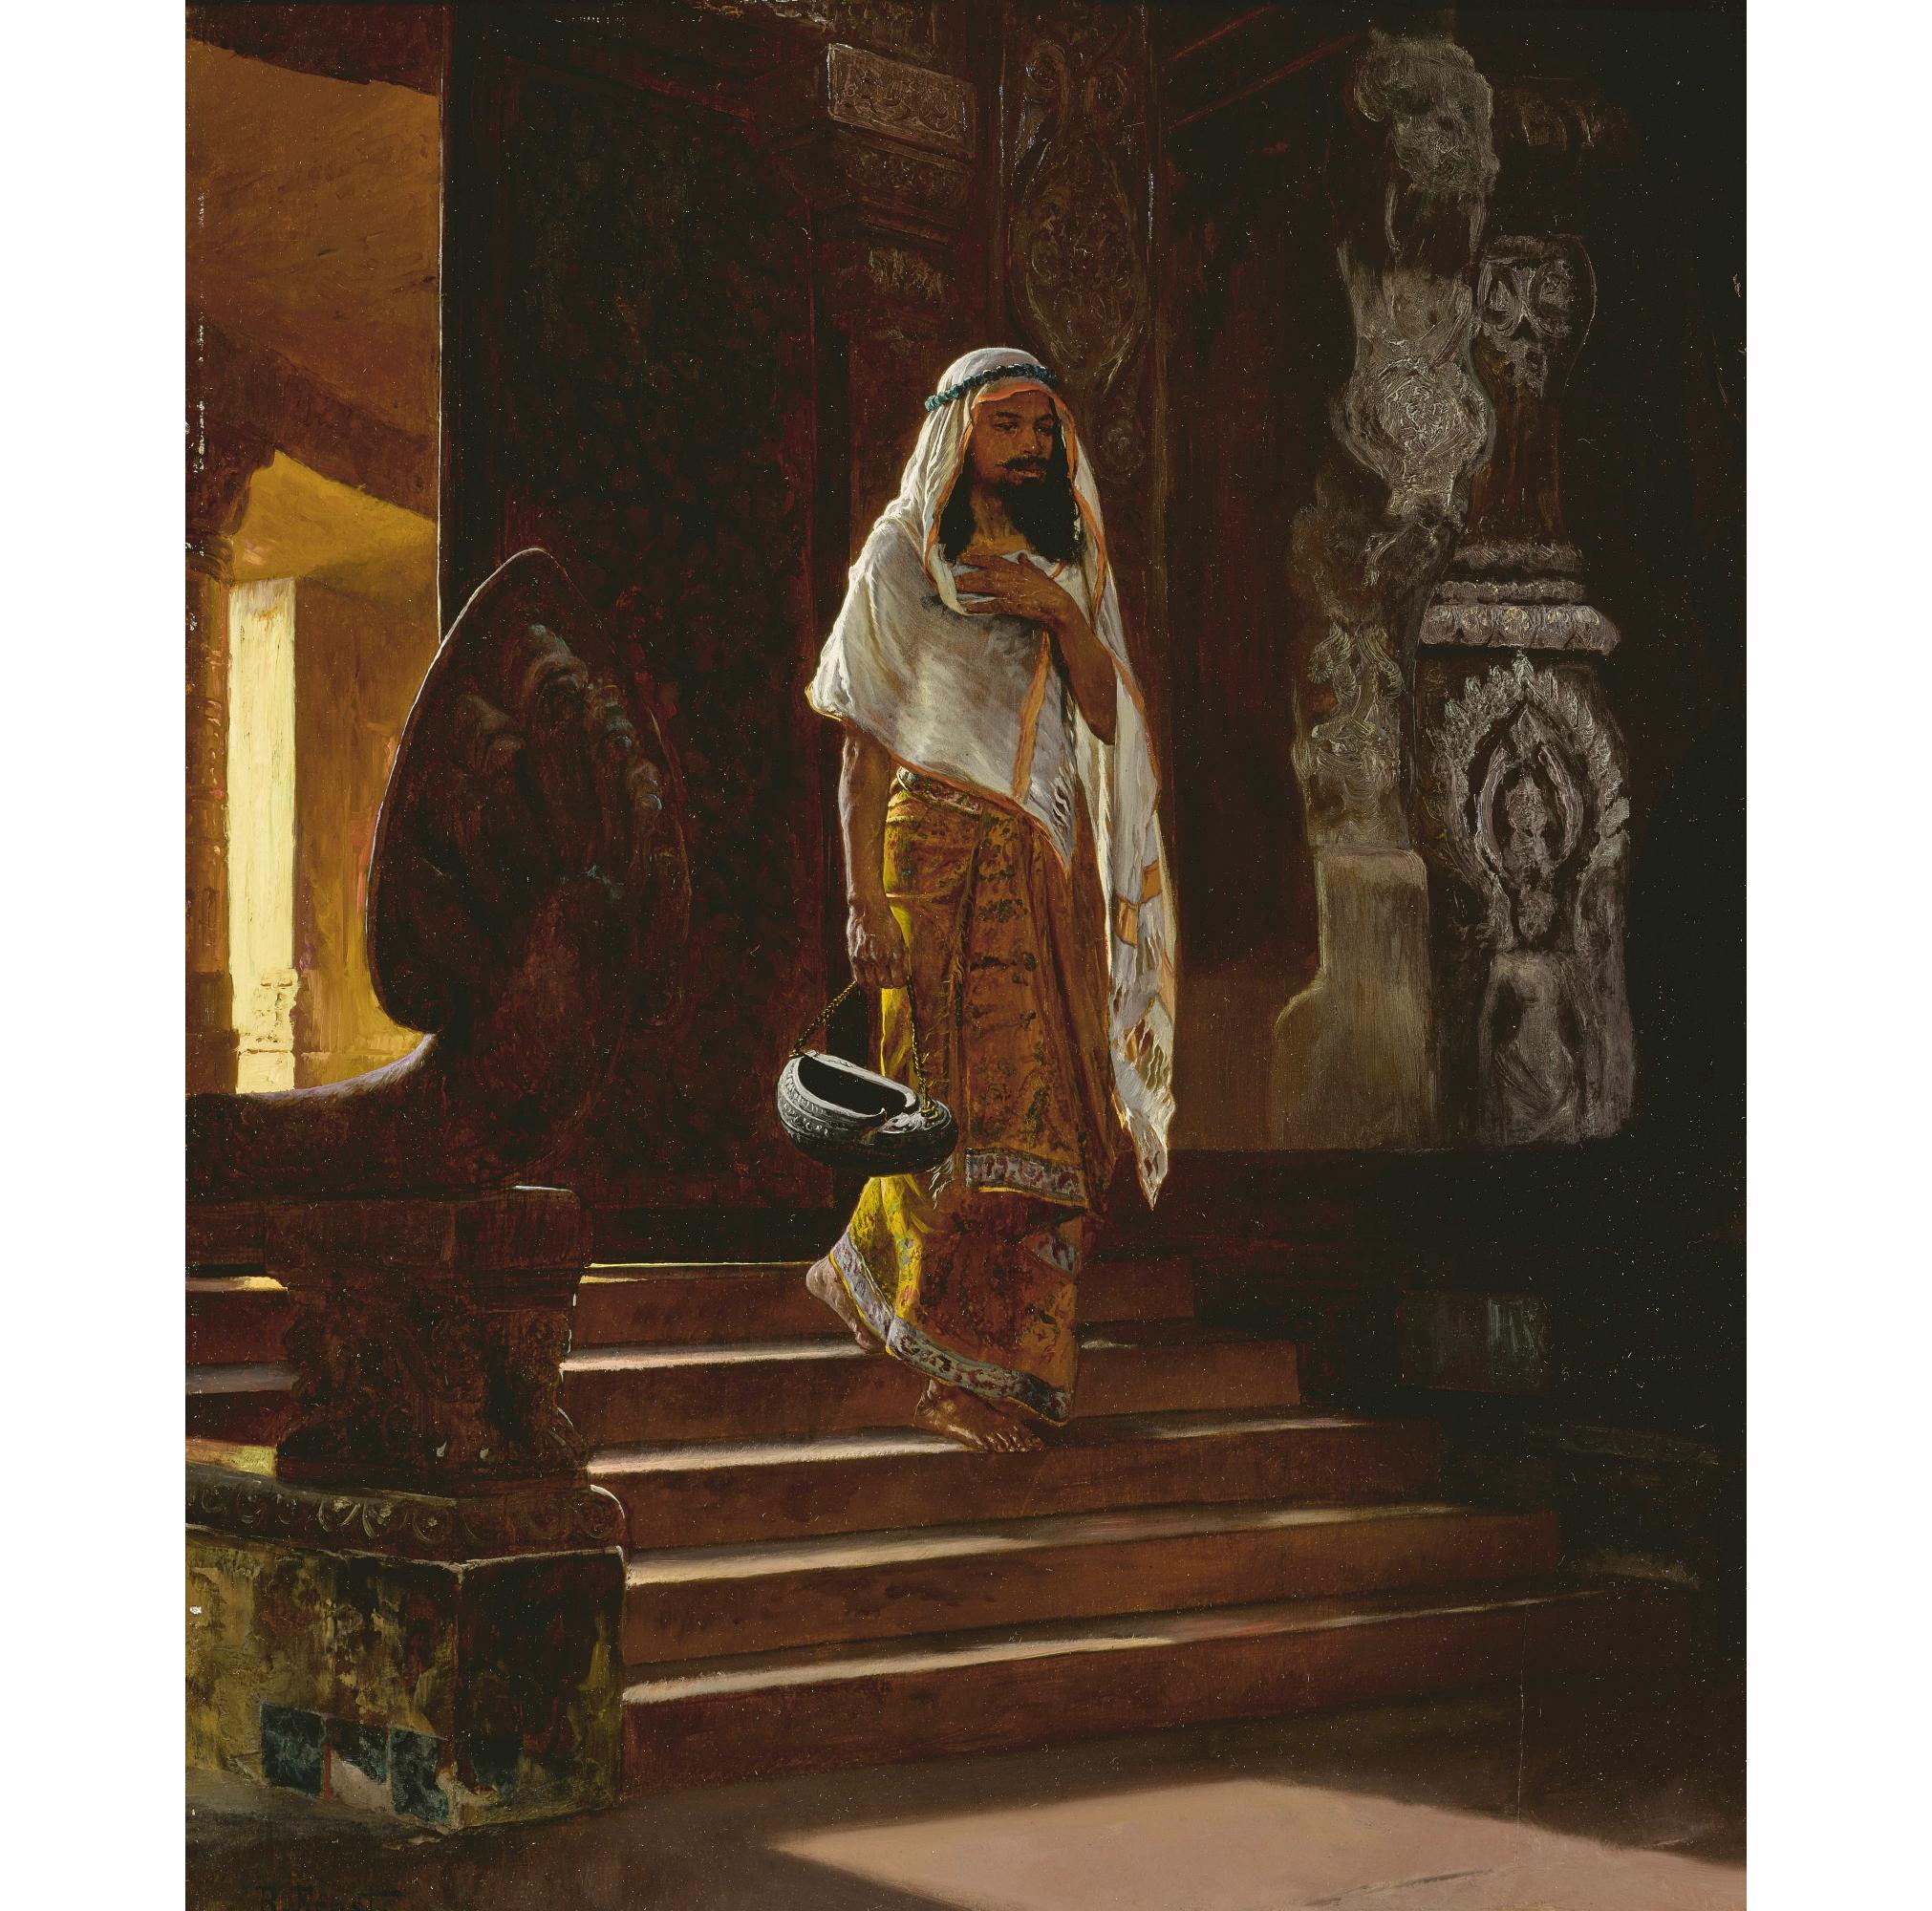 Rudolf Ernst

Austrian

1854 - 1932

A Dervish

 

signed R. Ernst lower left

oil on panel

Unframed: 55 by 45cm., 21¾ by 17¾in.

Framed: 90.8 by 81.5cm., 35¾ by 32in.

 

Dervishes in Islam were members of a Sufi fraternity, religious mendicants